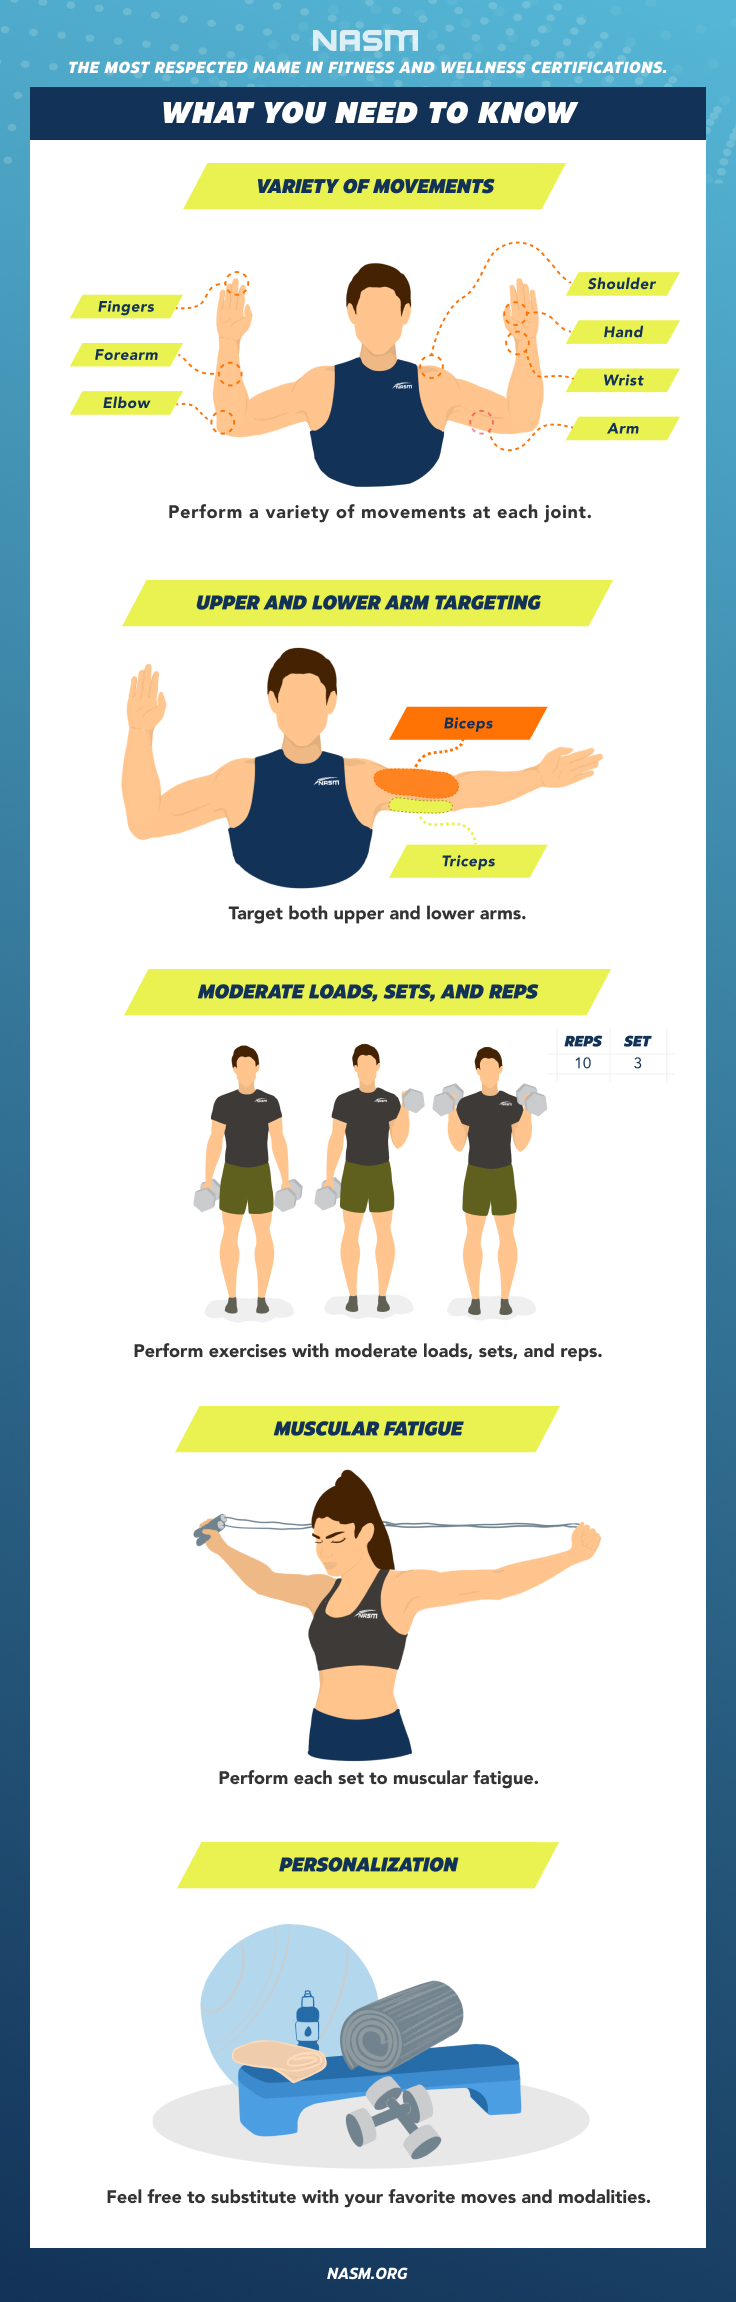 Toned Arms Workout  Effective workout plan, Beginner workout at home, Arm  workouts at home